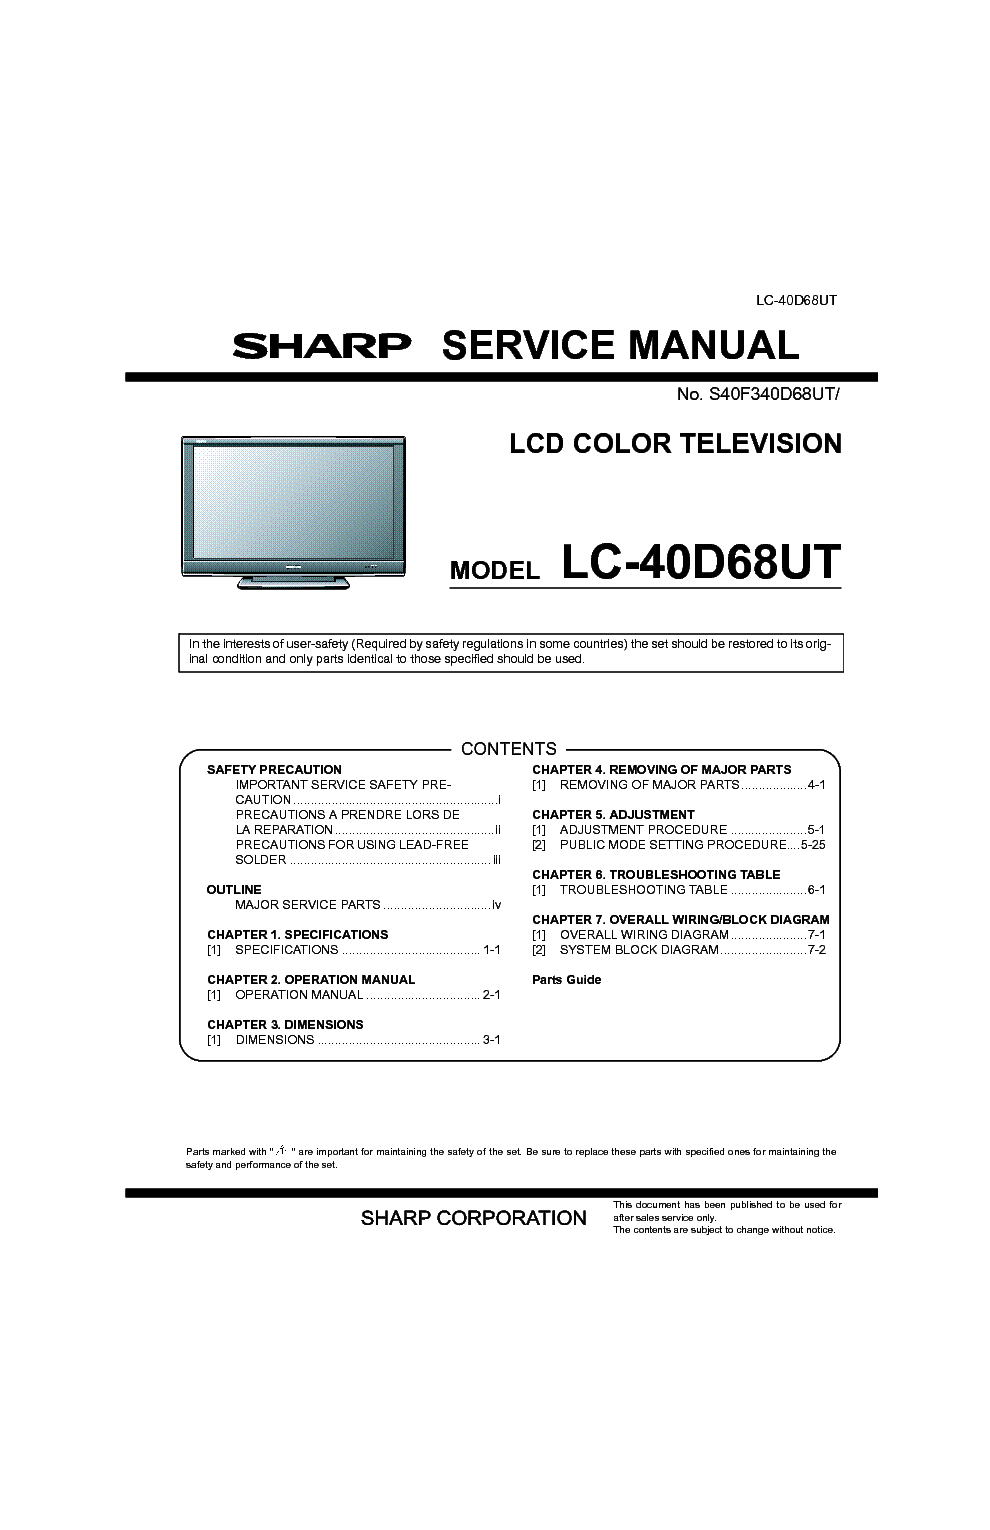 SHARP LC-40D68UT service manual (1st page)